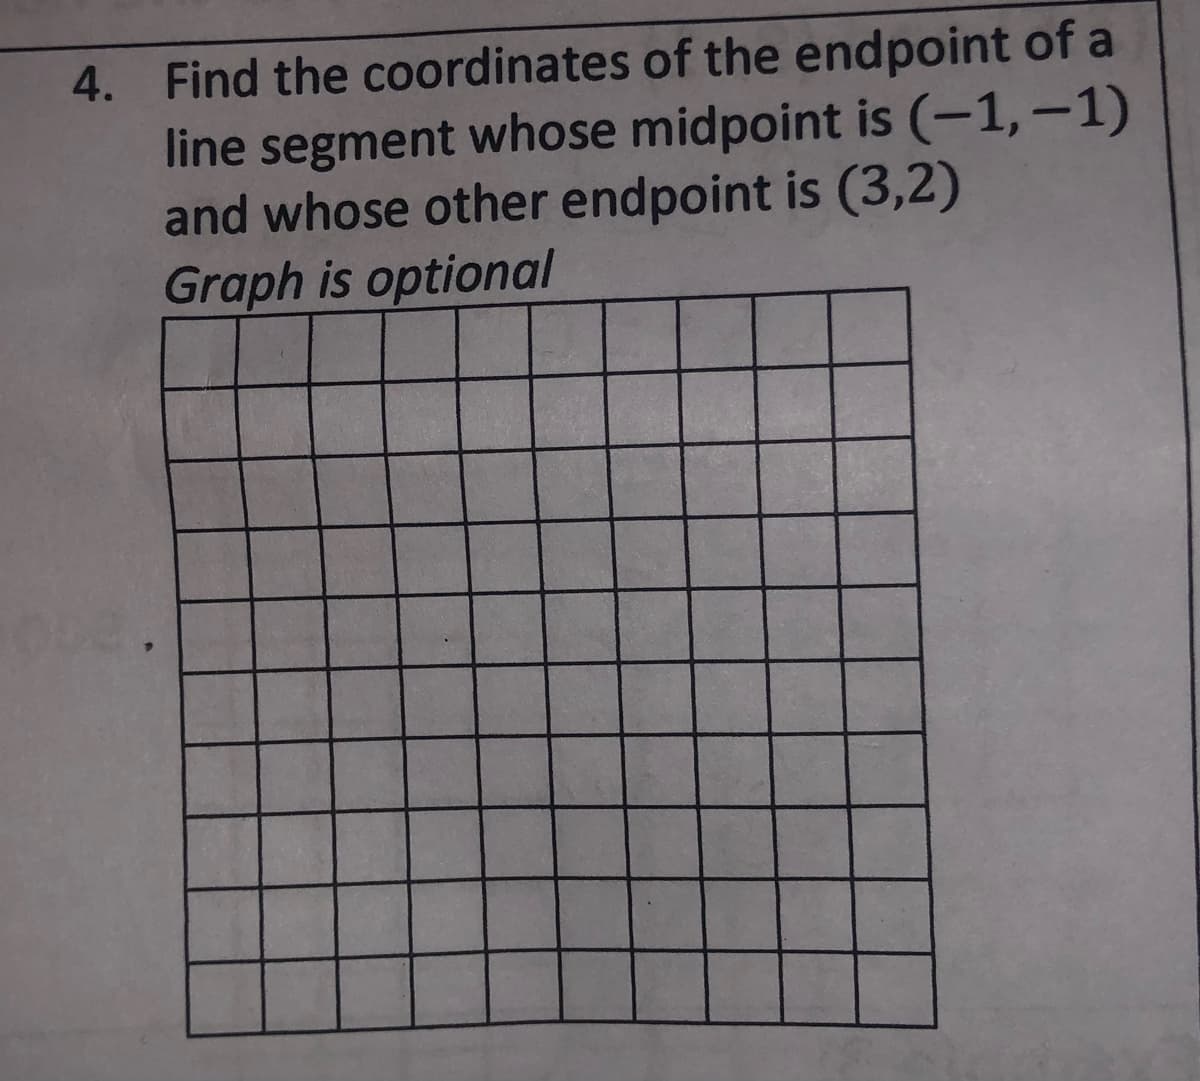 4. Find the coordinates of the endpoint of a
line segment whose midpoint is (-1,-1)
and whose other endpoint is (3,2)
Graph is optional
